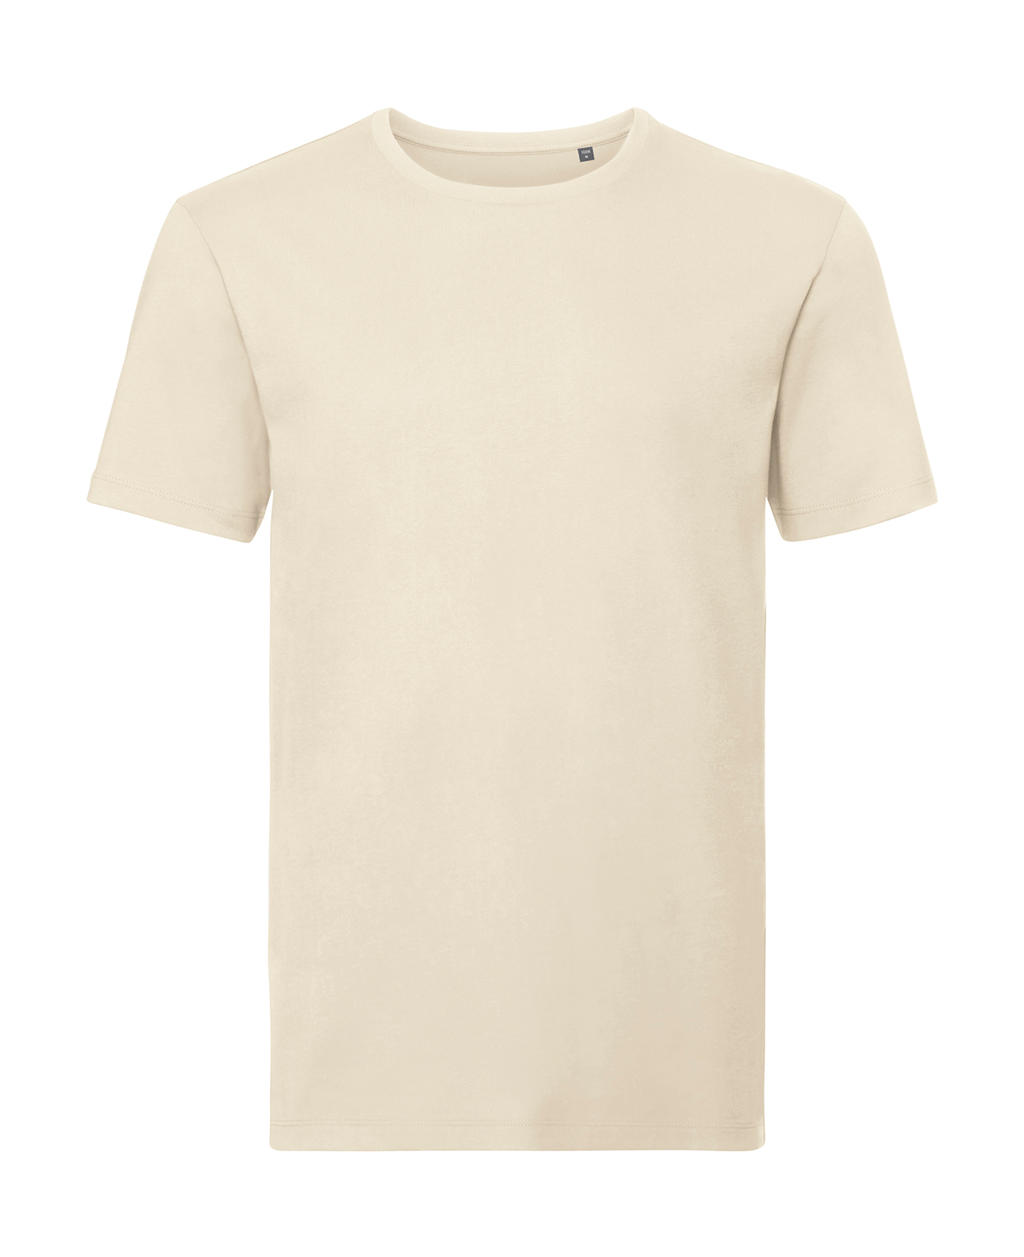  Mens Pure Organic Tee  in Farbe Natural